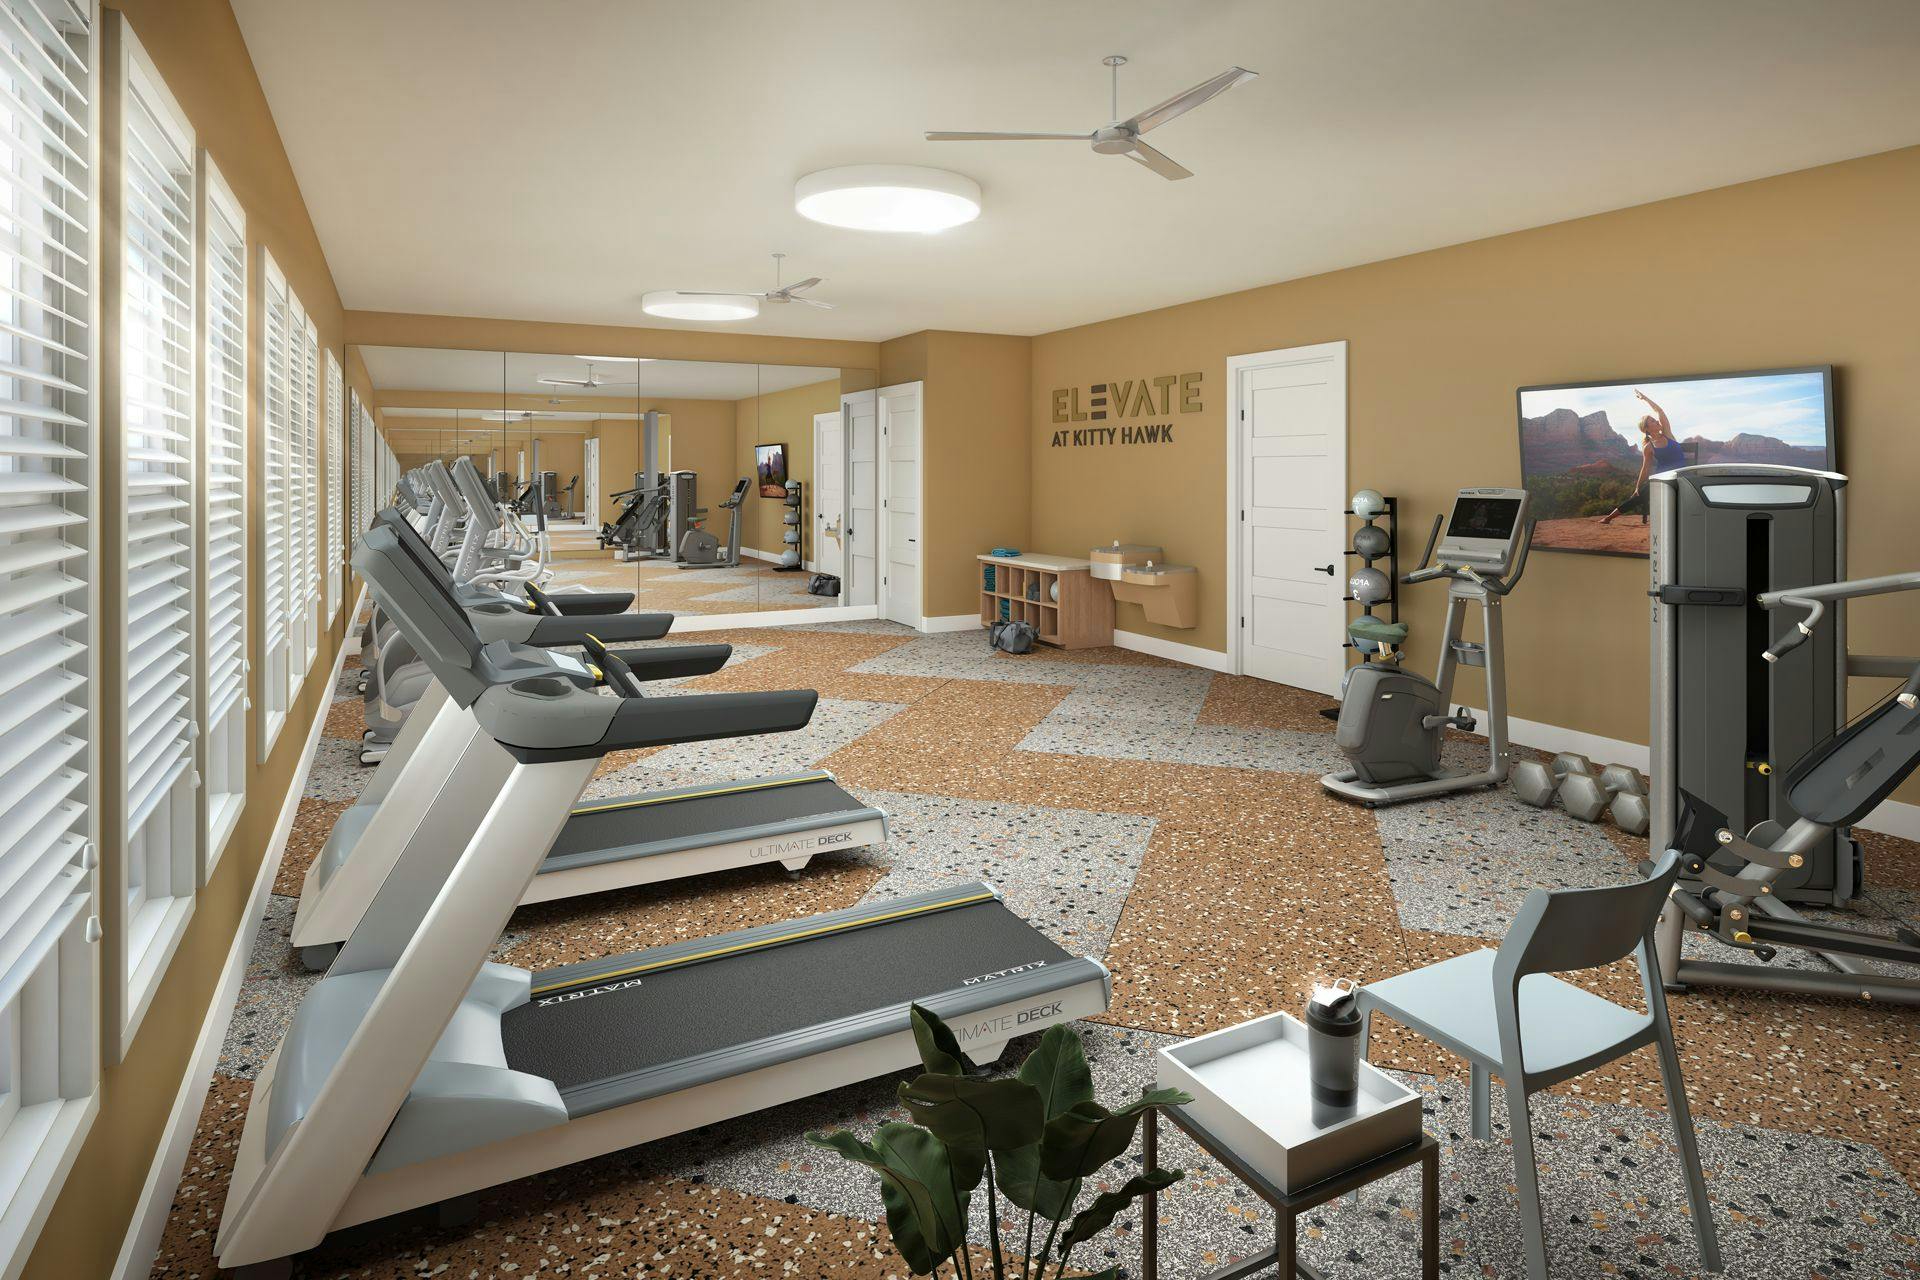 Elevate at Kitty Hawk Fitness Room